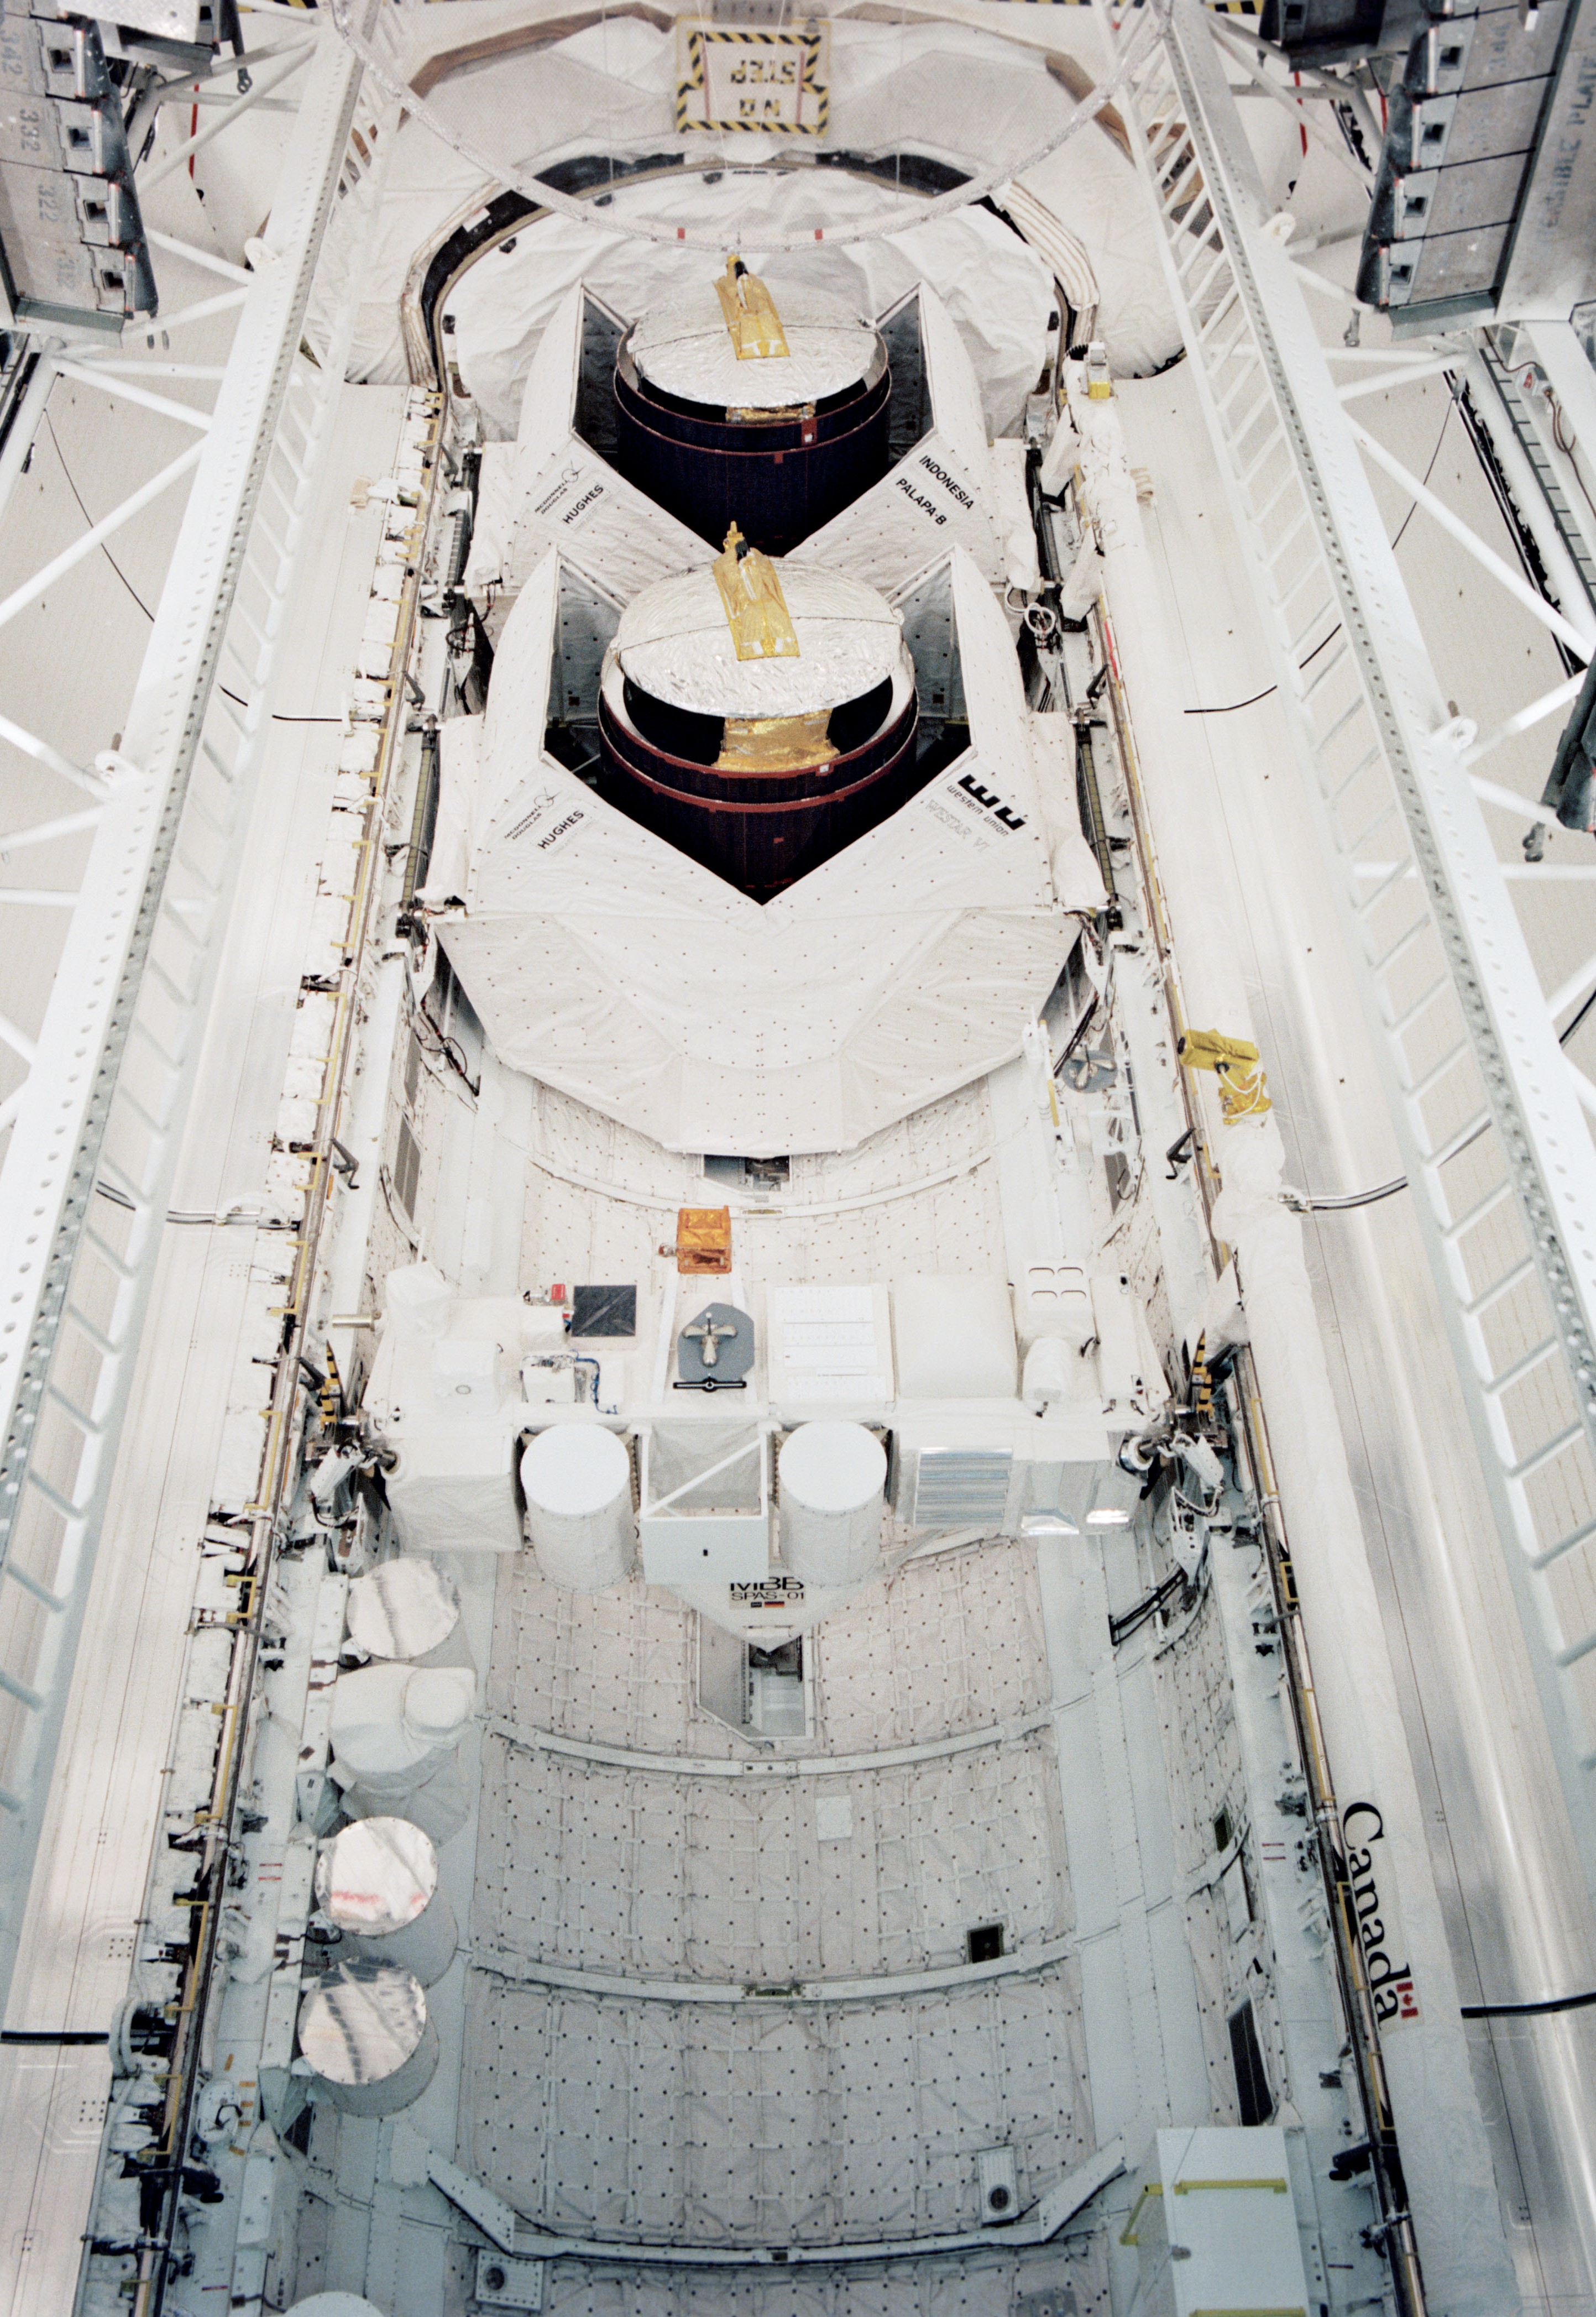 Challenger’s payload bay for STS-41B